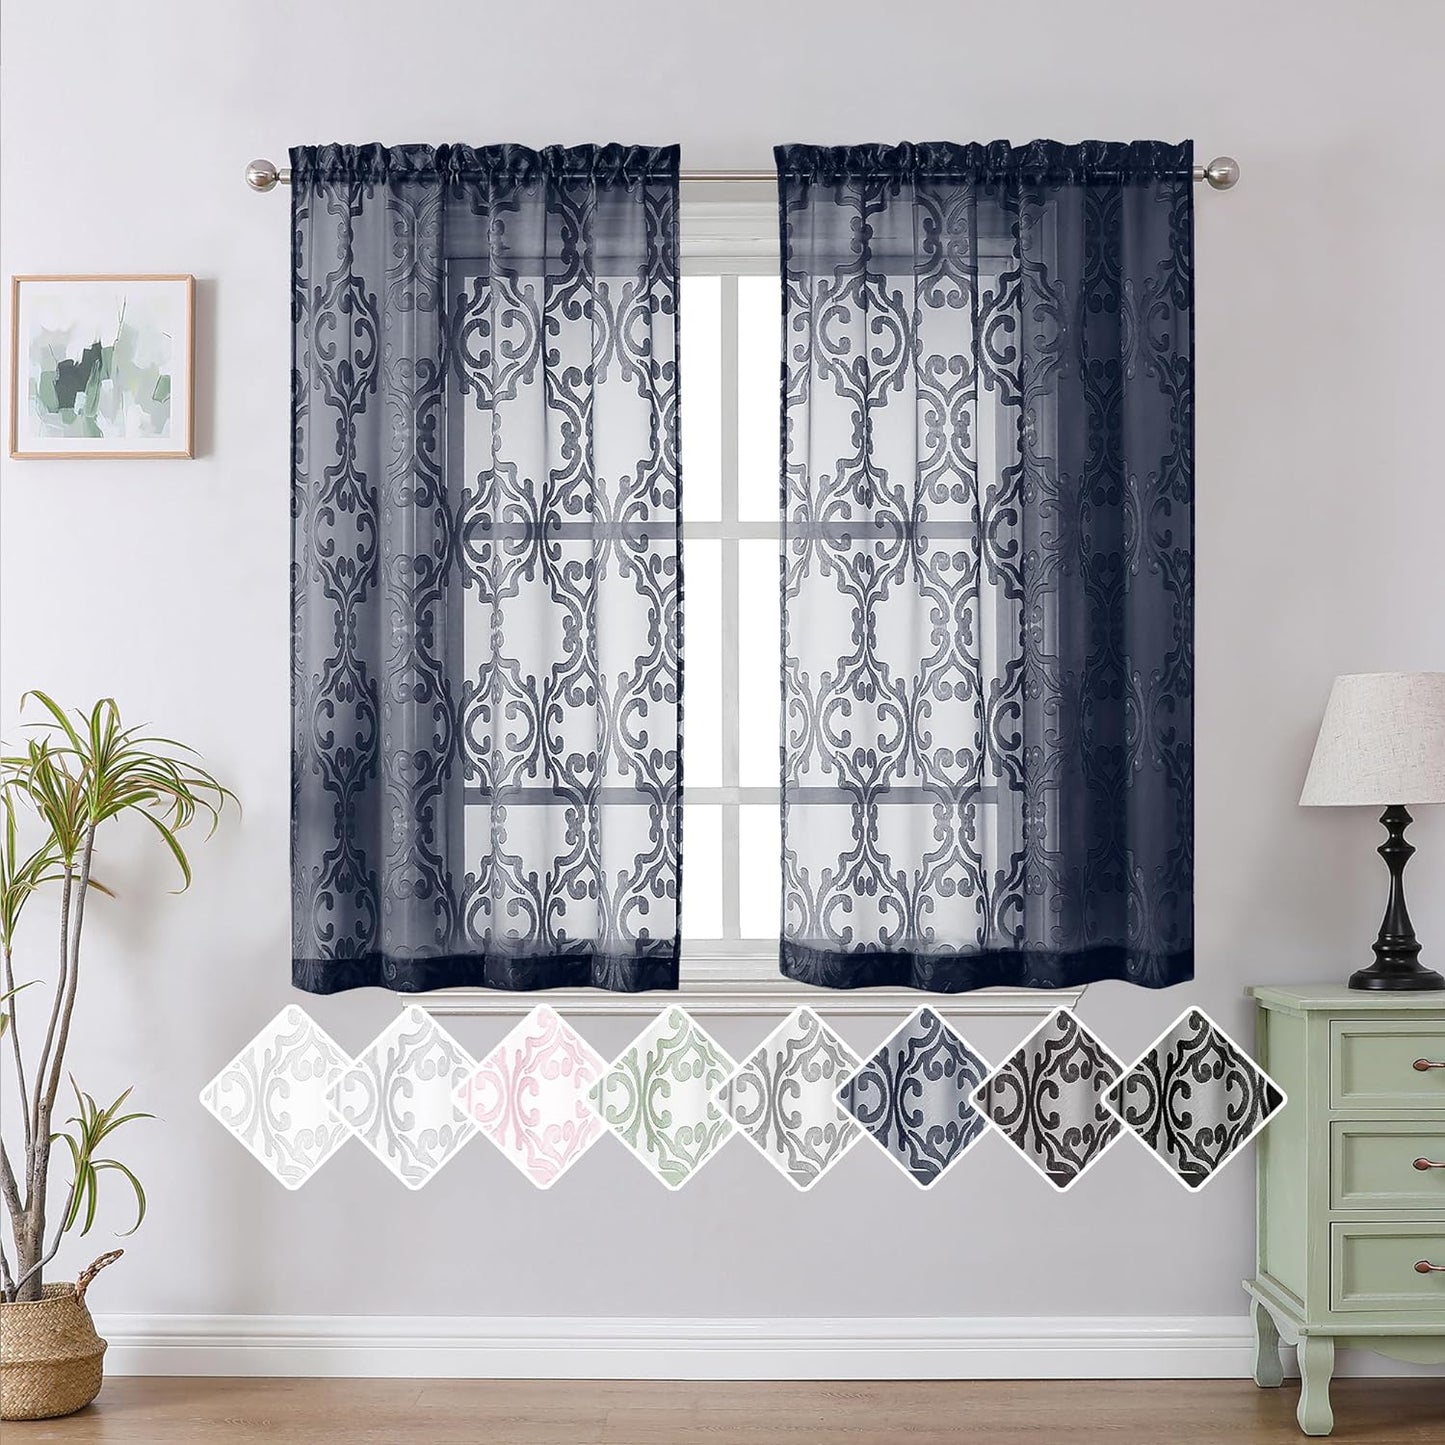 Aiyufeng Suri 2 Panels Sheer Sage Green Curtains 63 Inches Long, Light & Airy Privacy Textured Sheer Drapes, Dual Rod Pocket Voile Clipped Floral Luxury Panels for Bedroom Living Room, 42 X 63 Inch  Aiyufeng Navy Blue 2X42X45" 